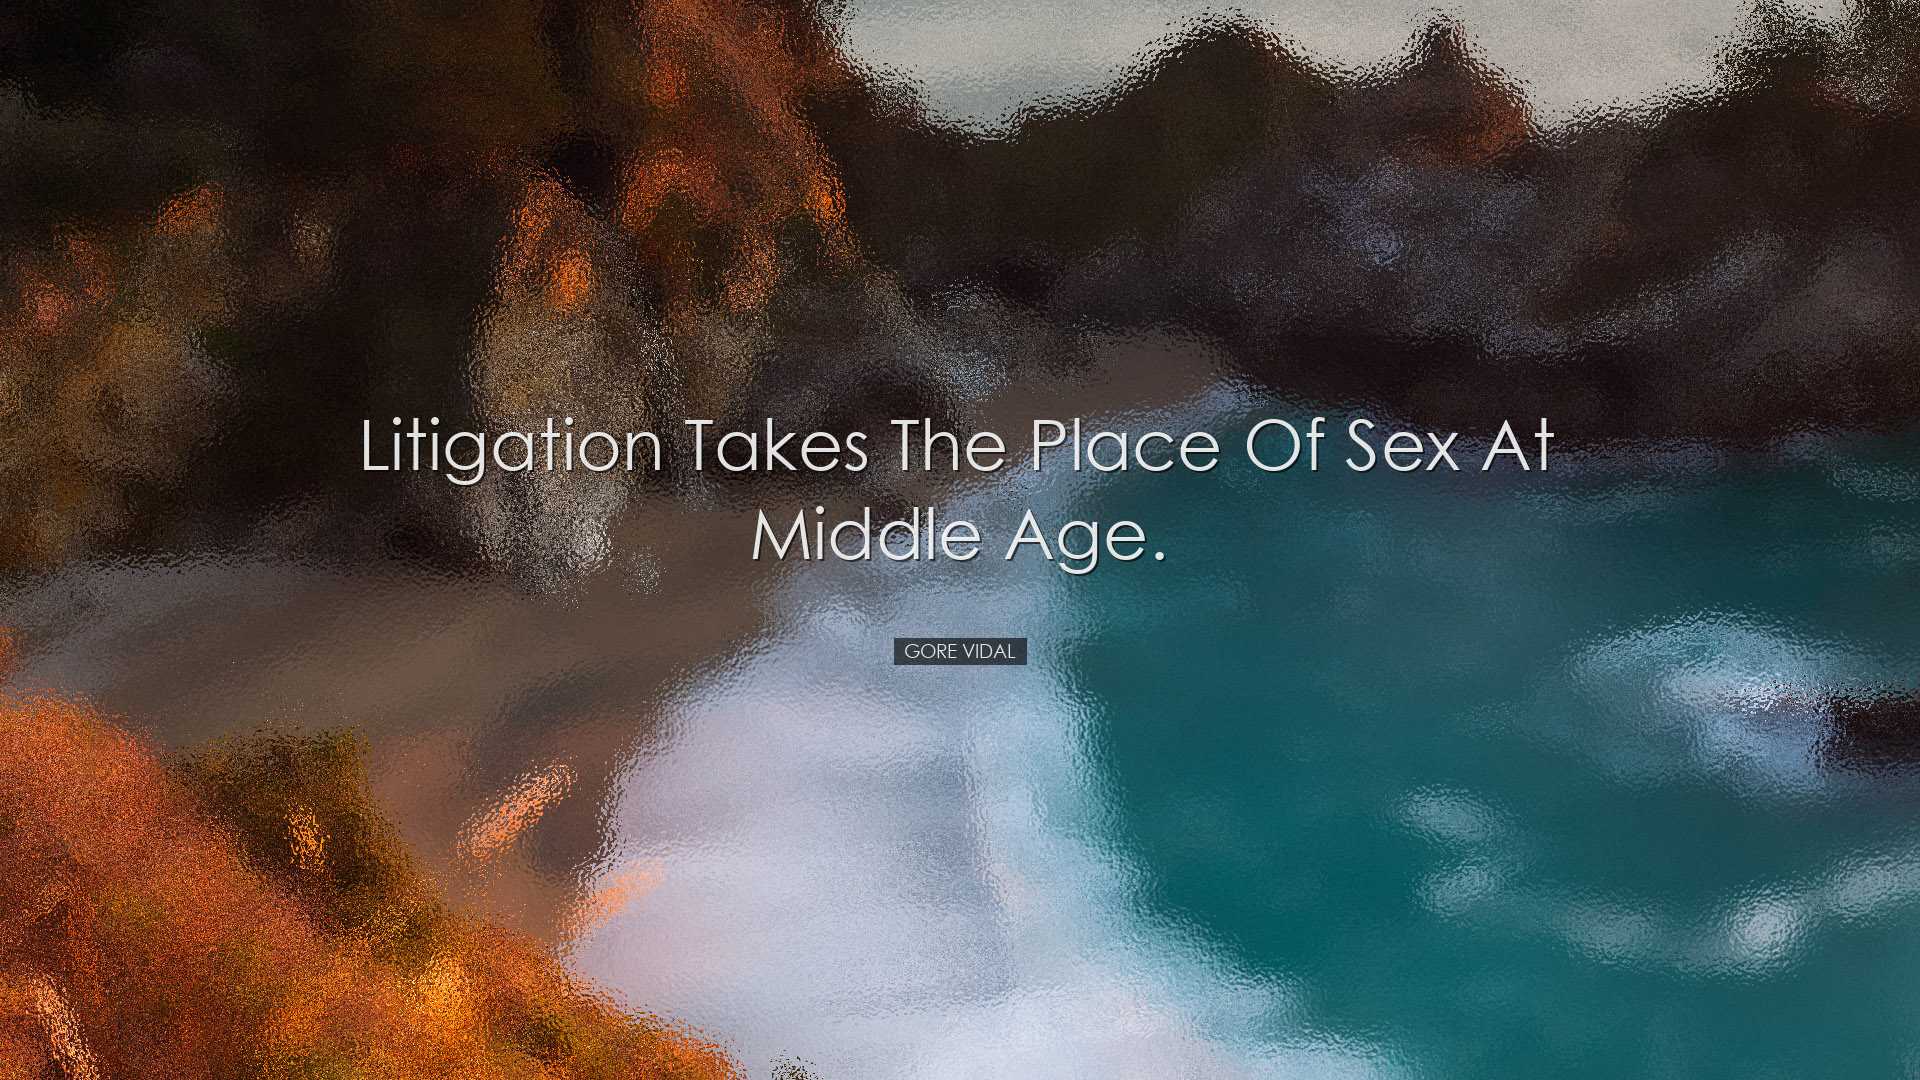 Litigation takes the place of sex at middle age. - Gore Vidal